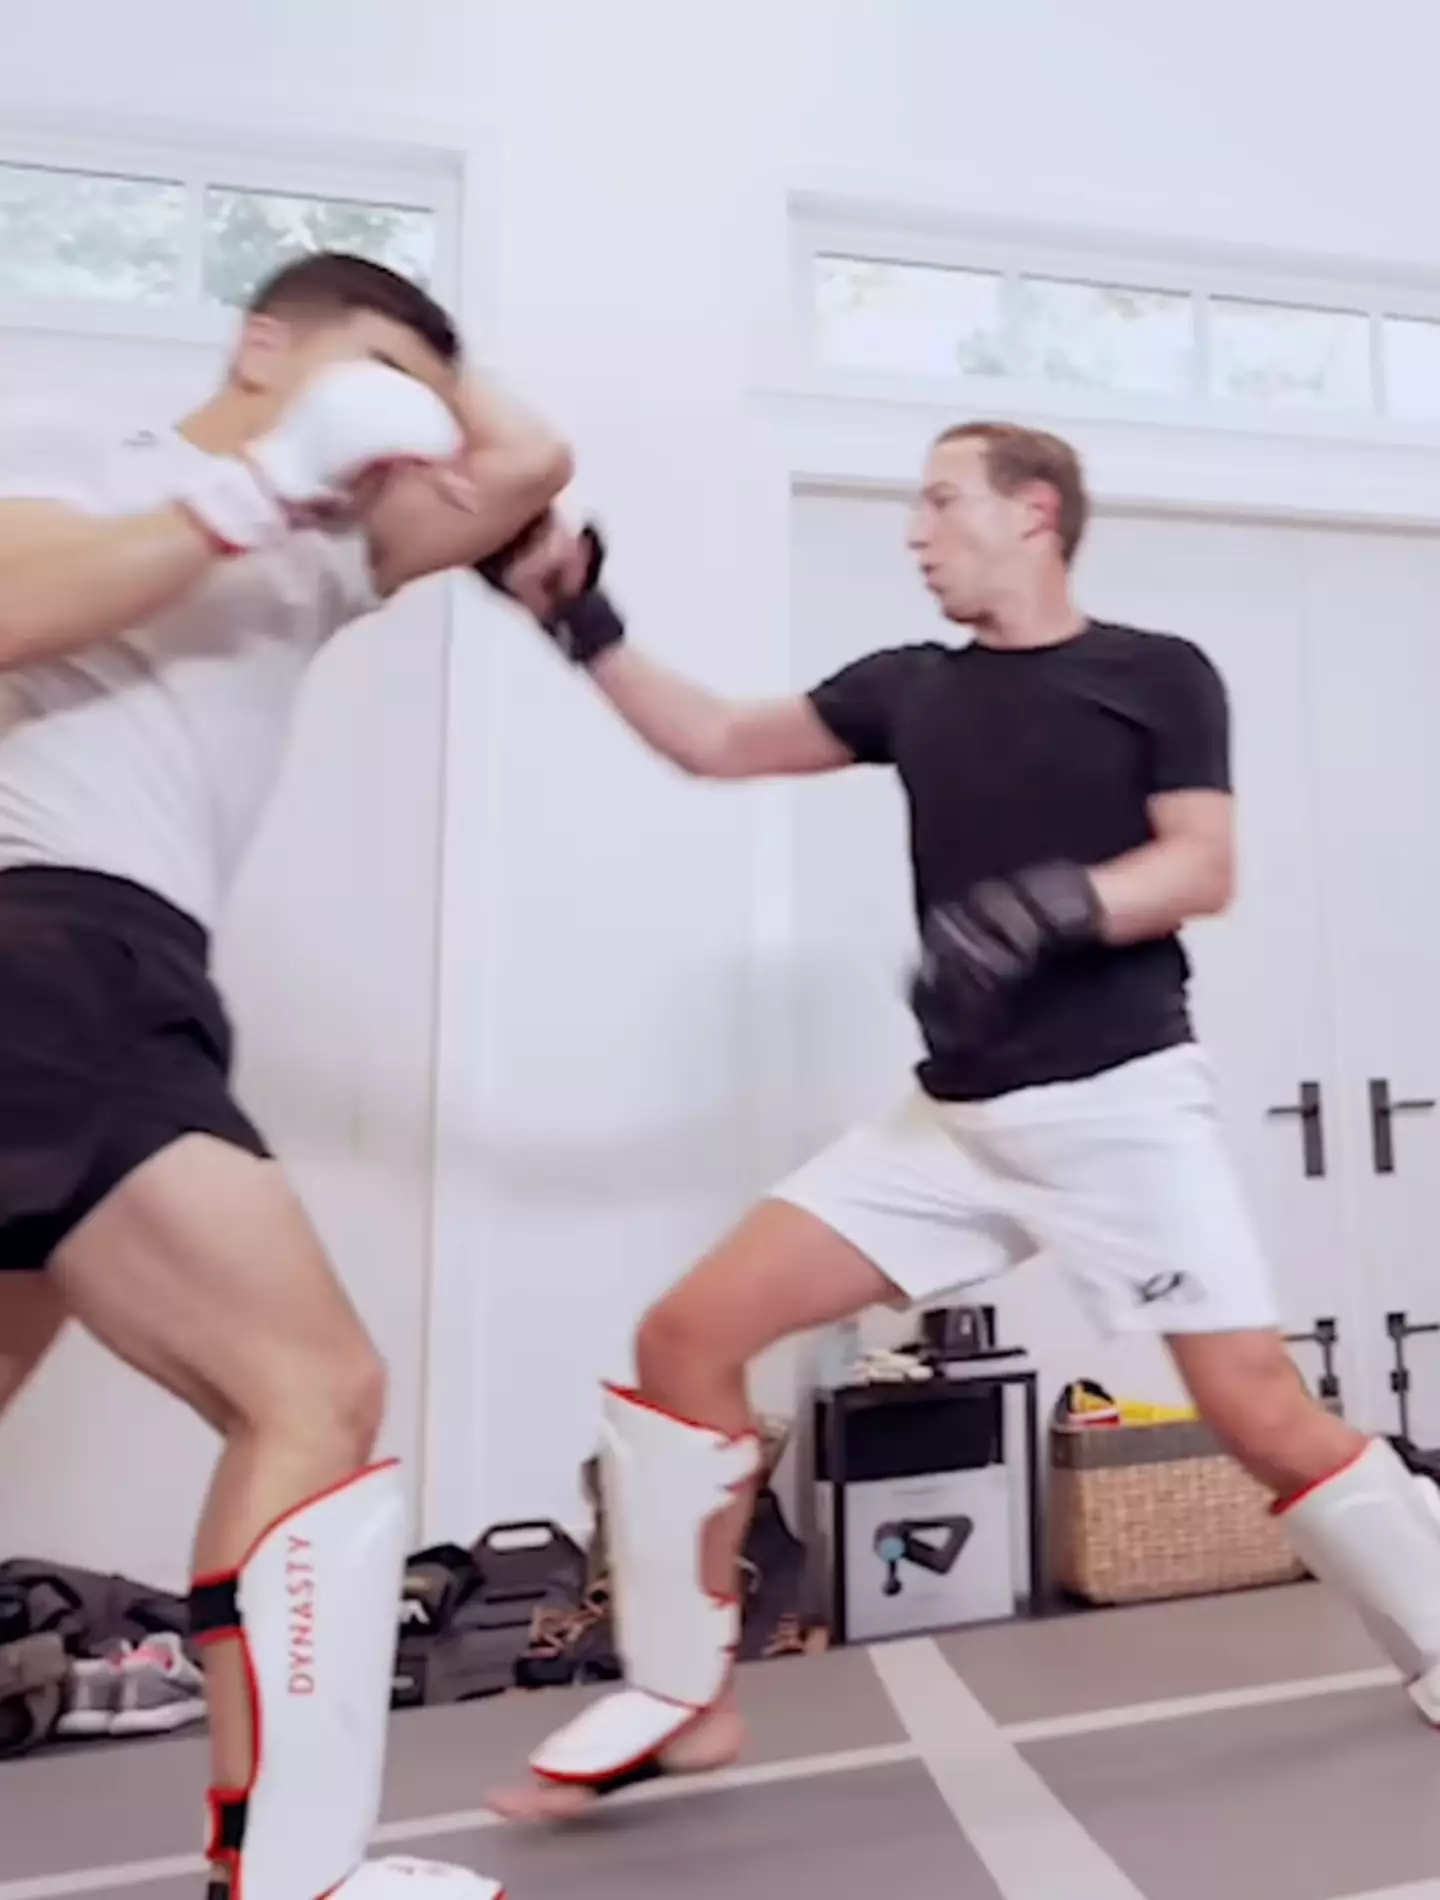 People were shocked to discover the Meta CEO has some serious MMA skills.